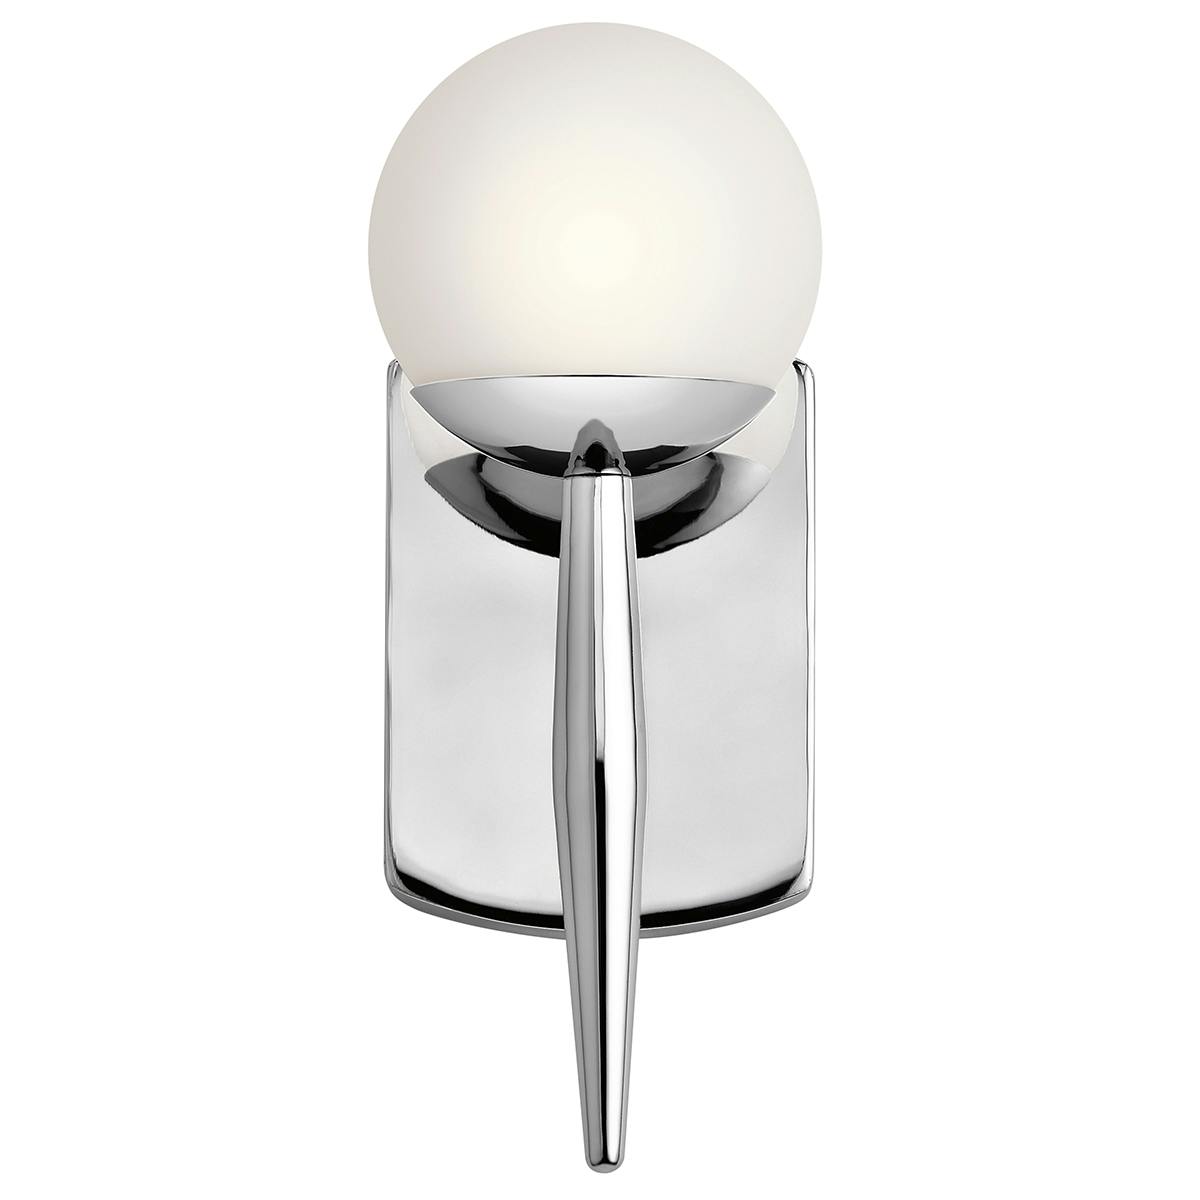 Front view of the Jasper 1 Light Halogen Wall Sconce Chrome on a white background